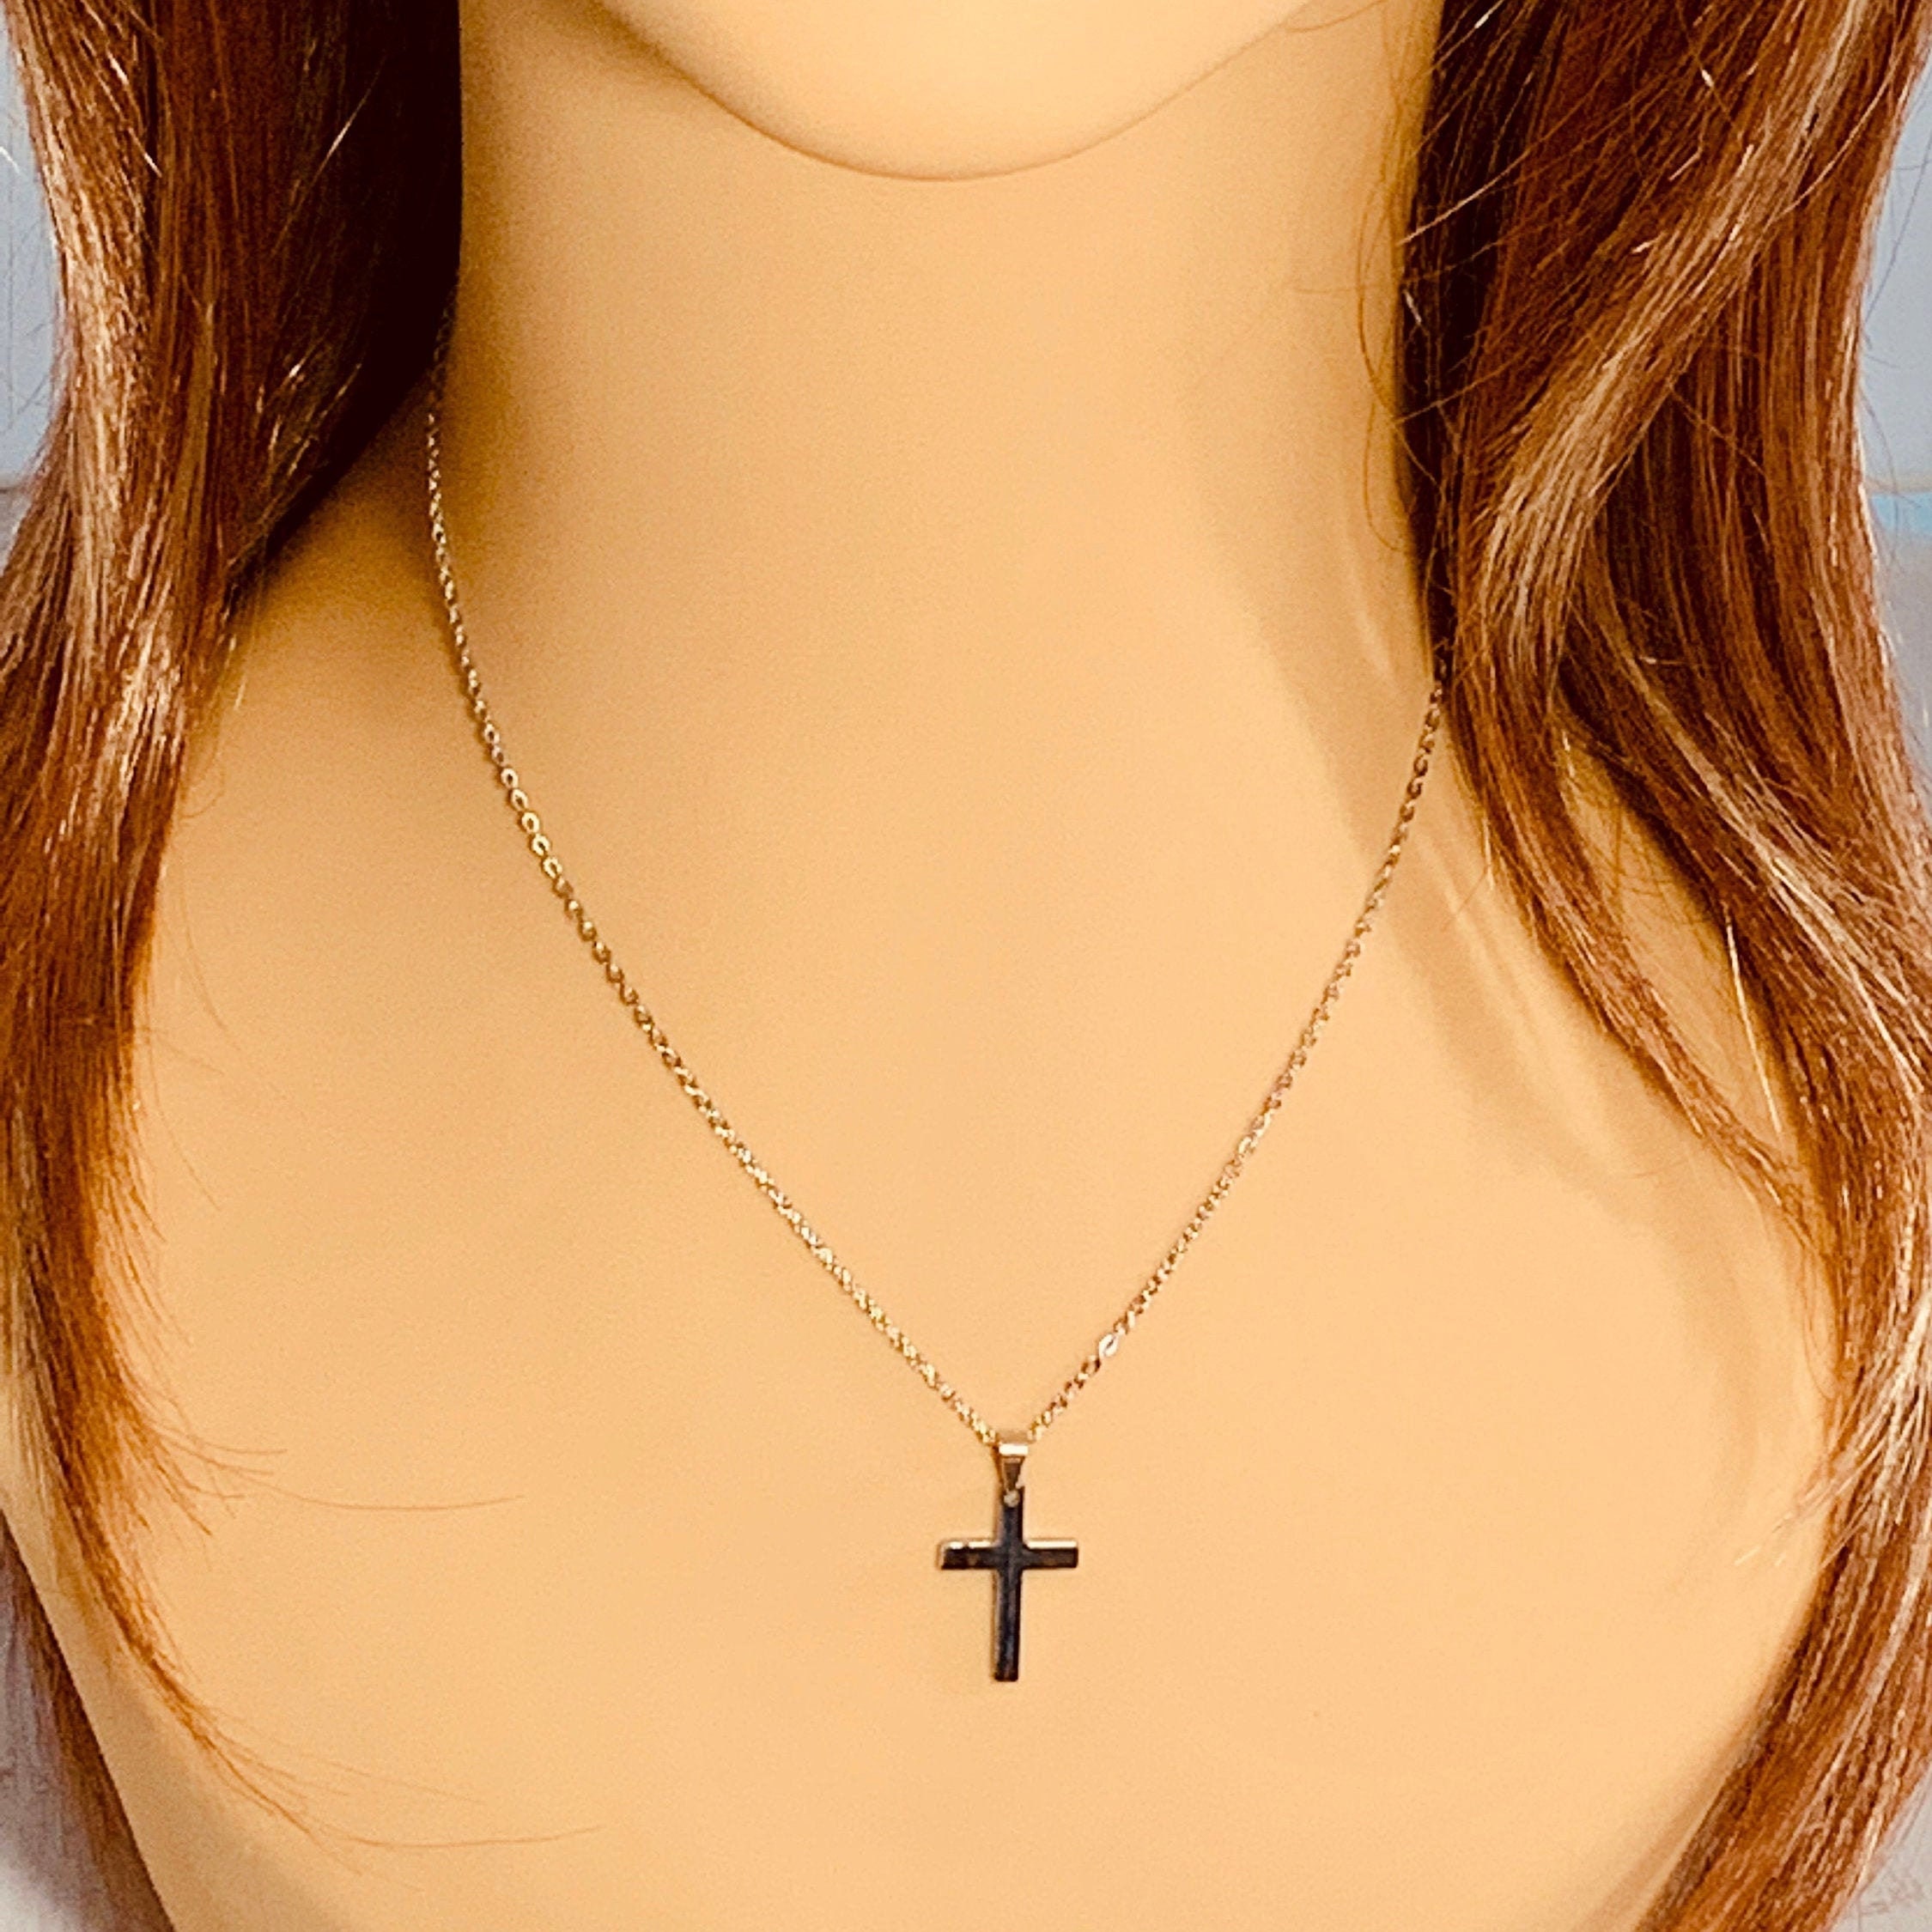 Girls' Primrose Cross Necklace - jewelry - by owner - sale - craigslist